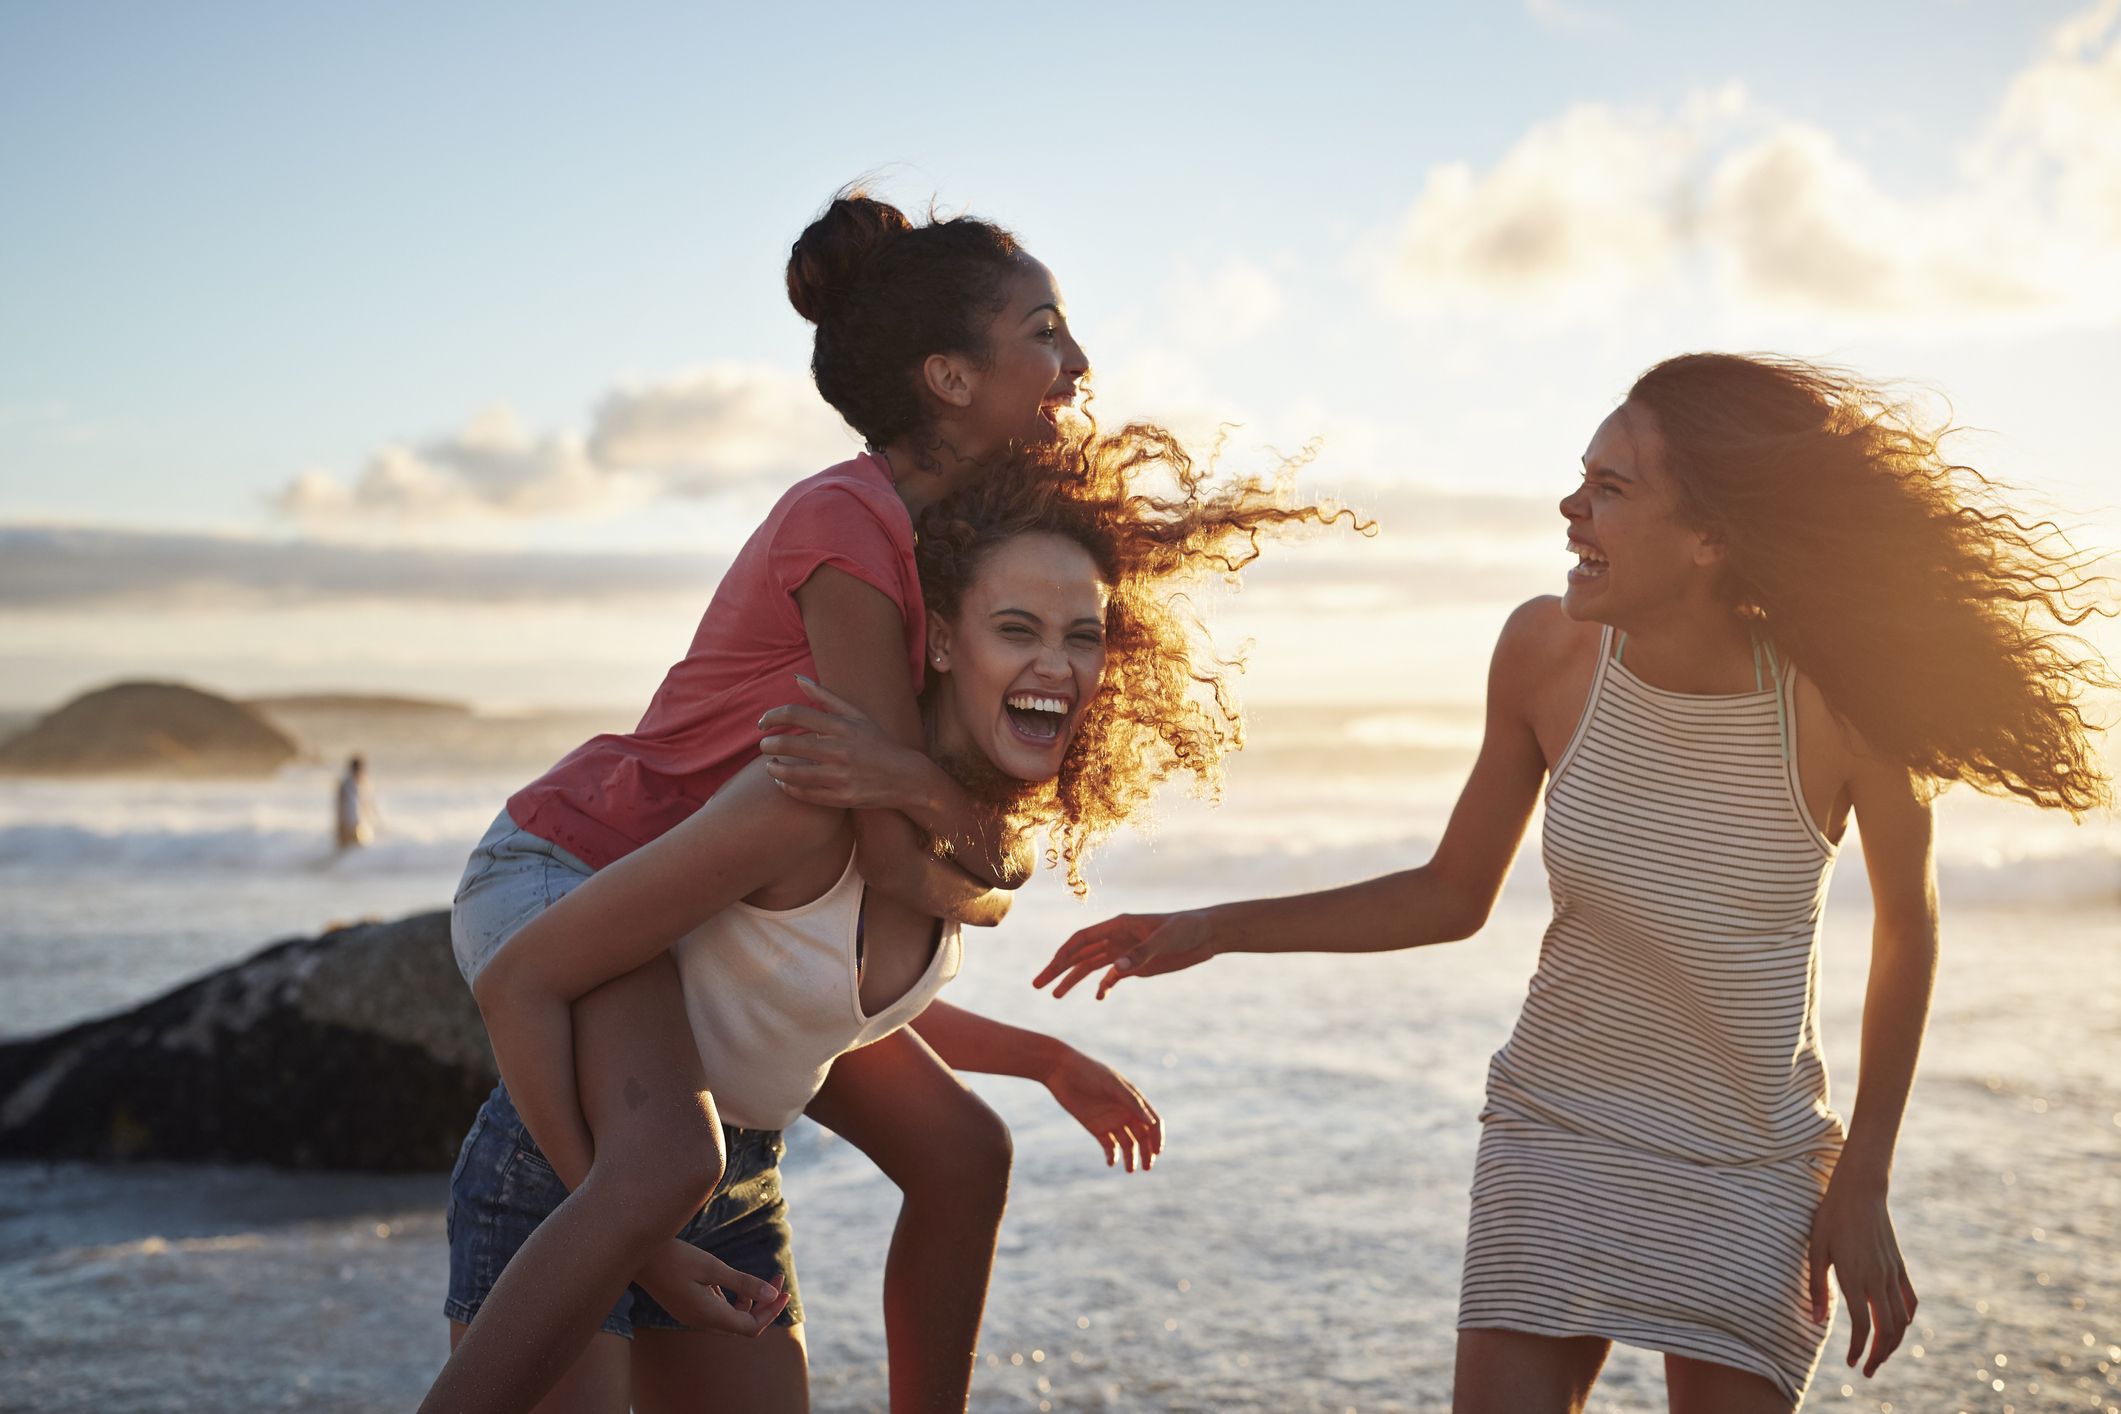 Summer Bucket List Bff Things To Do With Friends